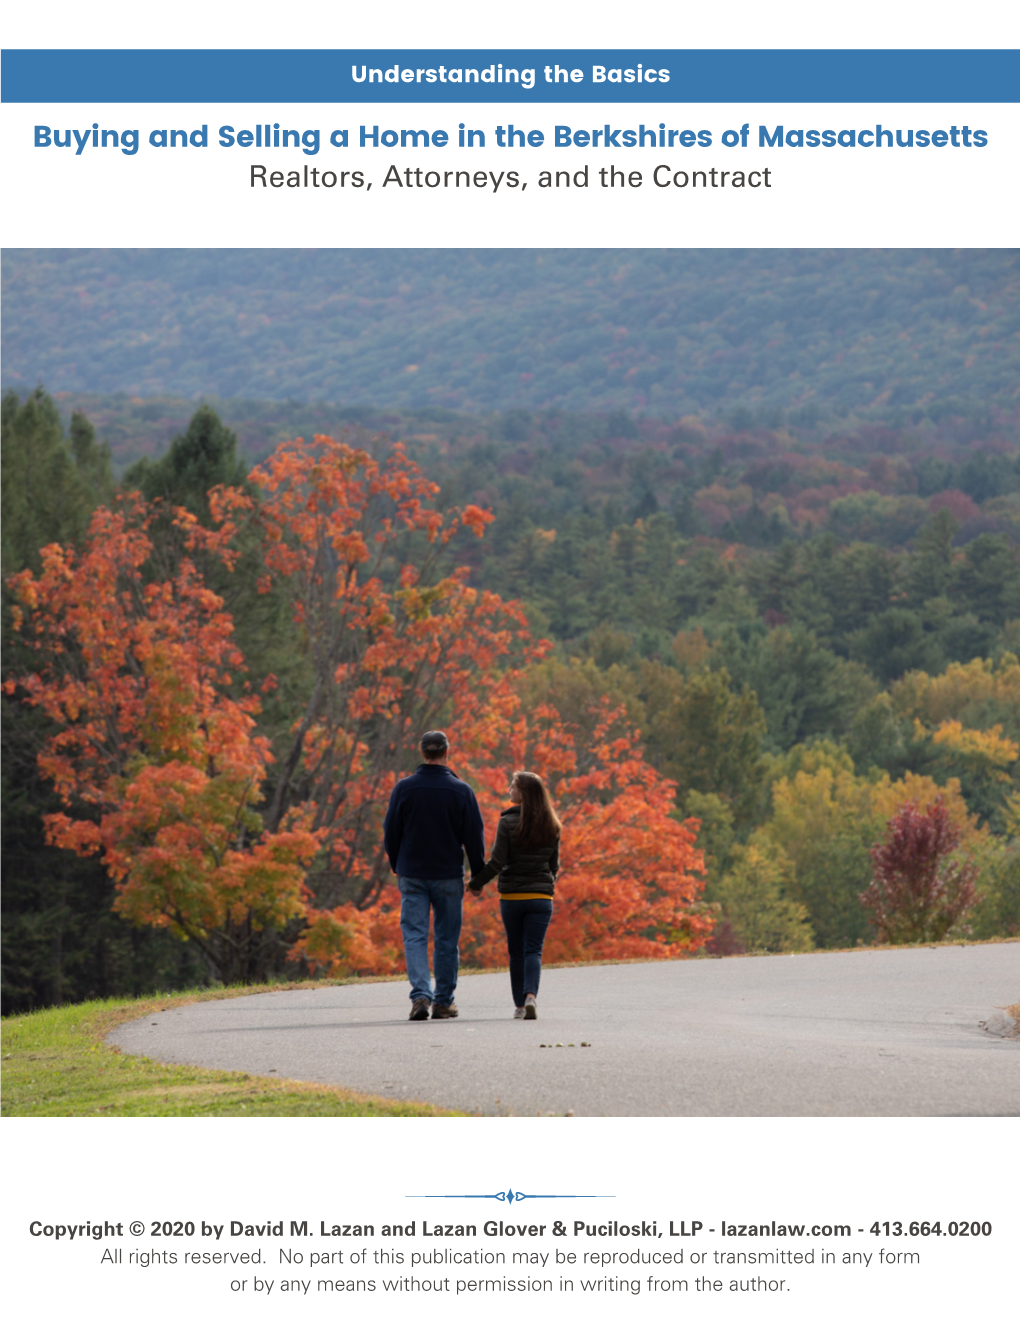 Realtors, Attorneys, and the Contract in the Berkshires